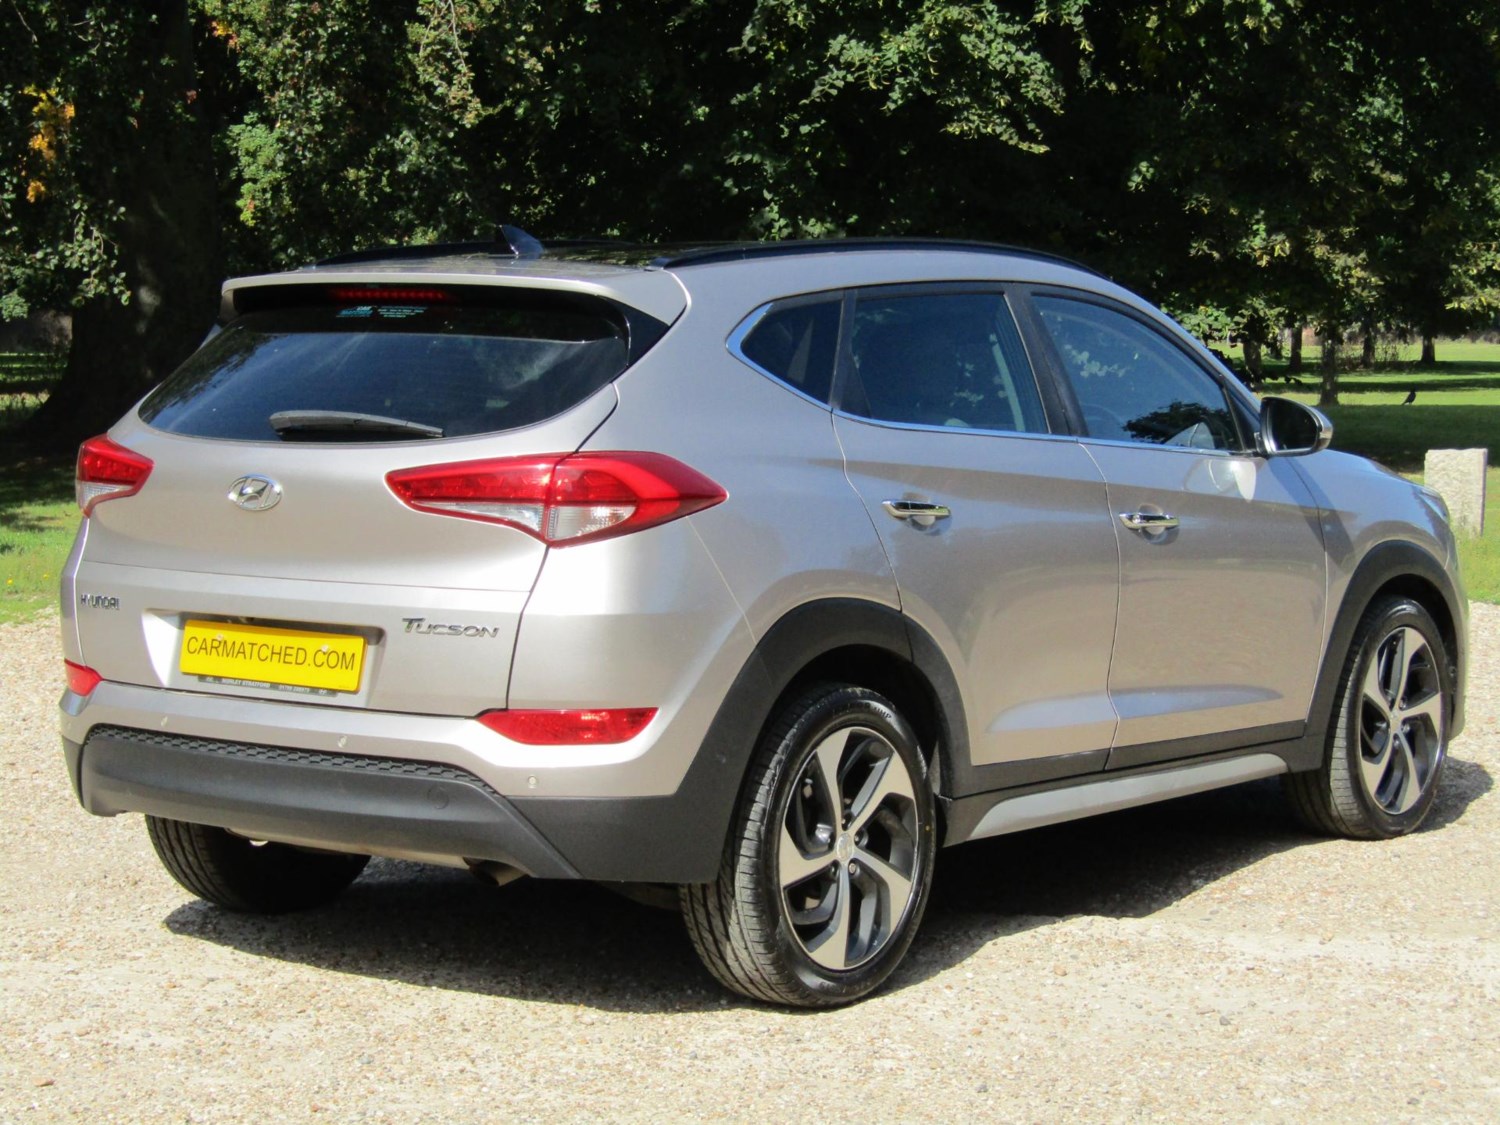 2017 (17) Hyundai Tucson 1.7 CRDi Blue Drive Premium SE 5dr 2WD DCT For Sale In Broadstairs, Kent